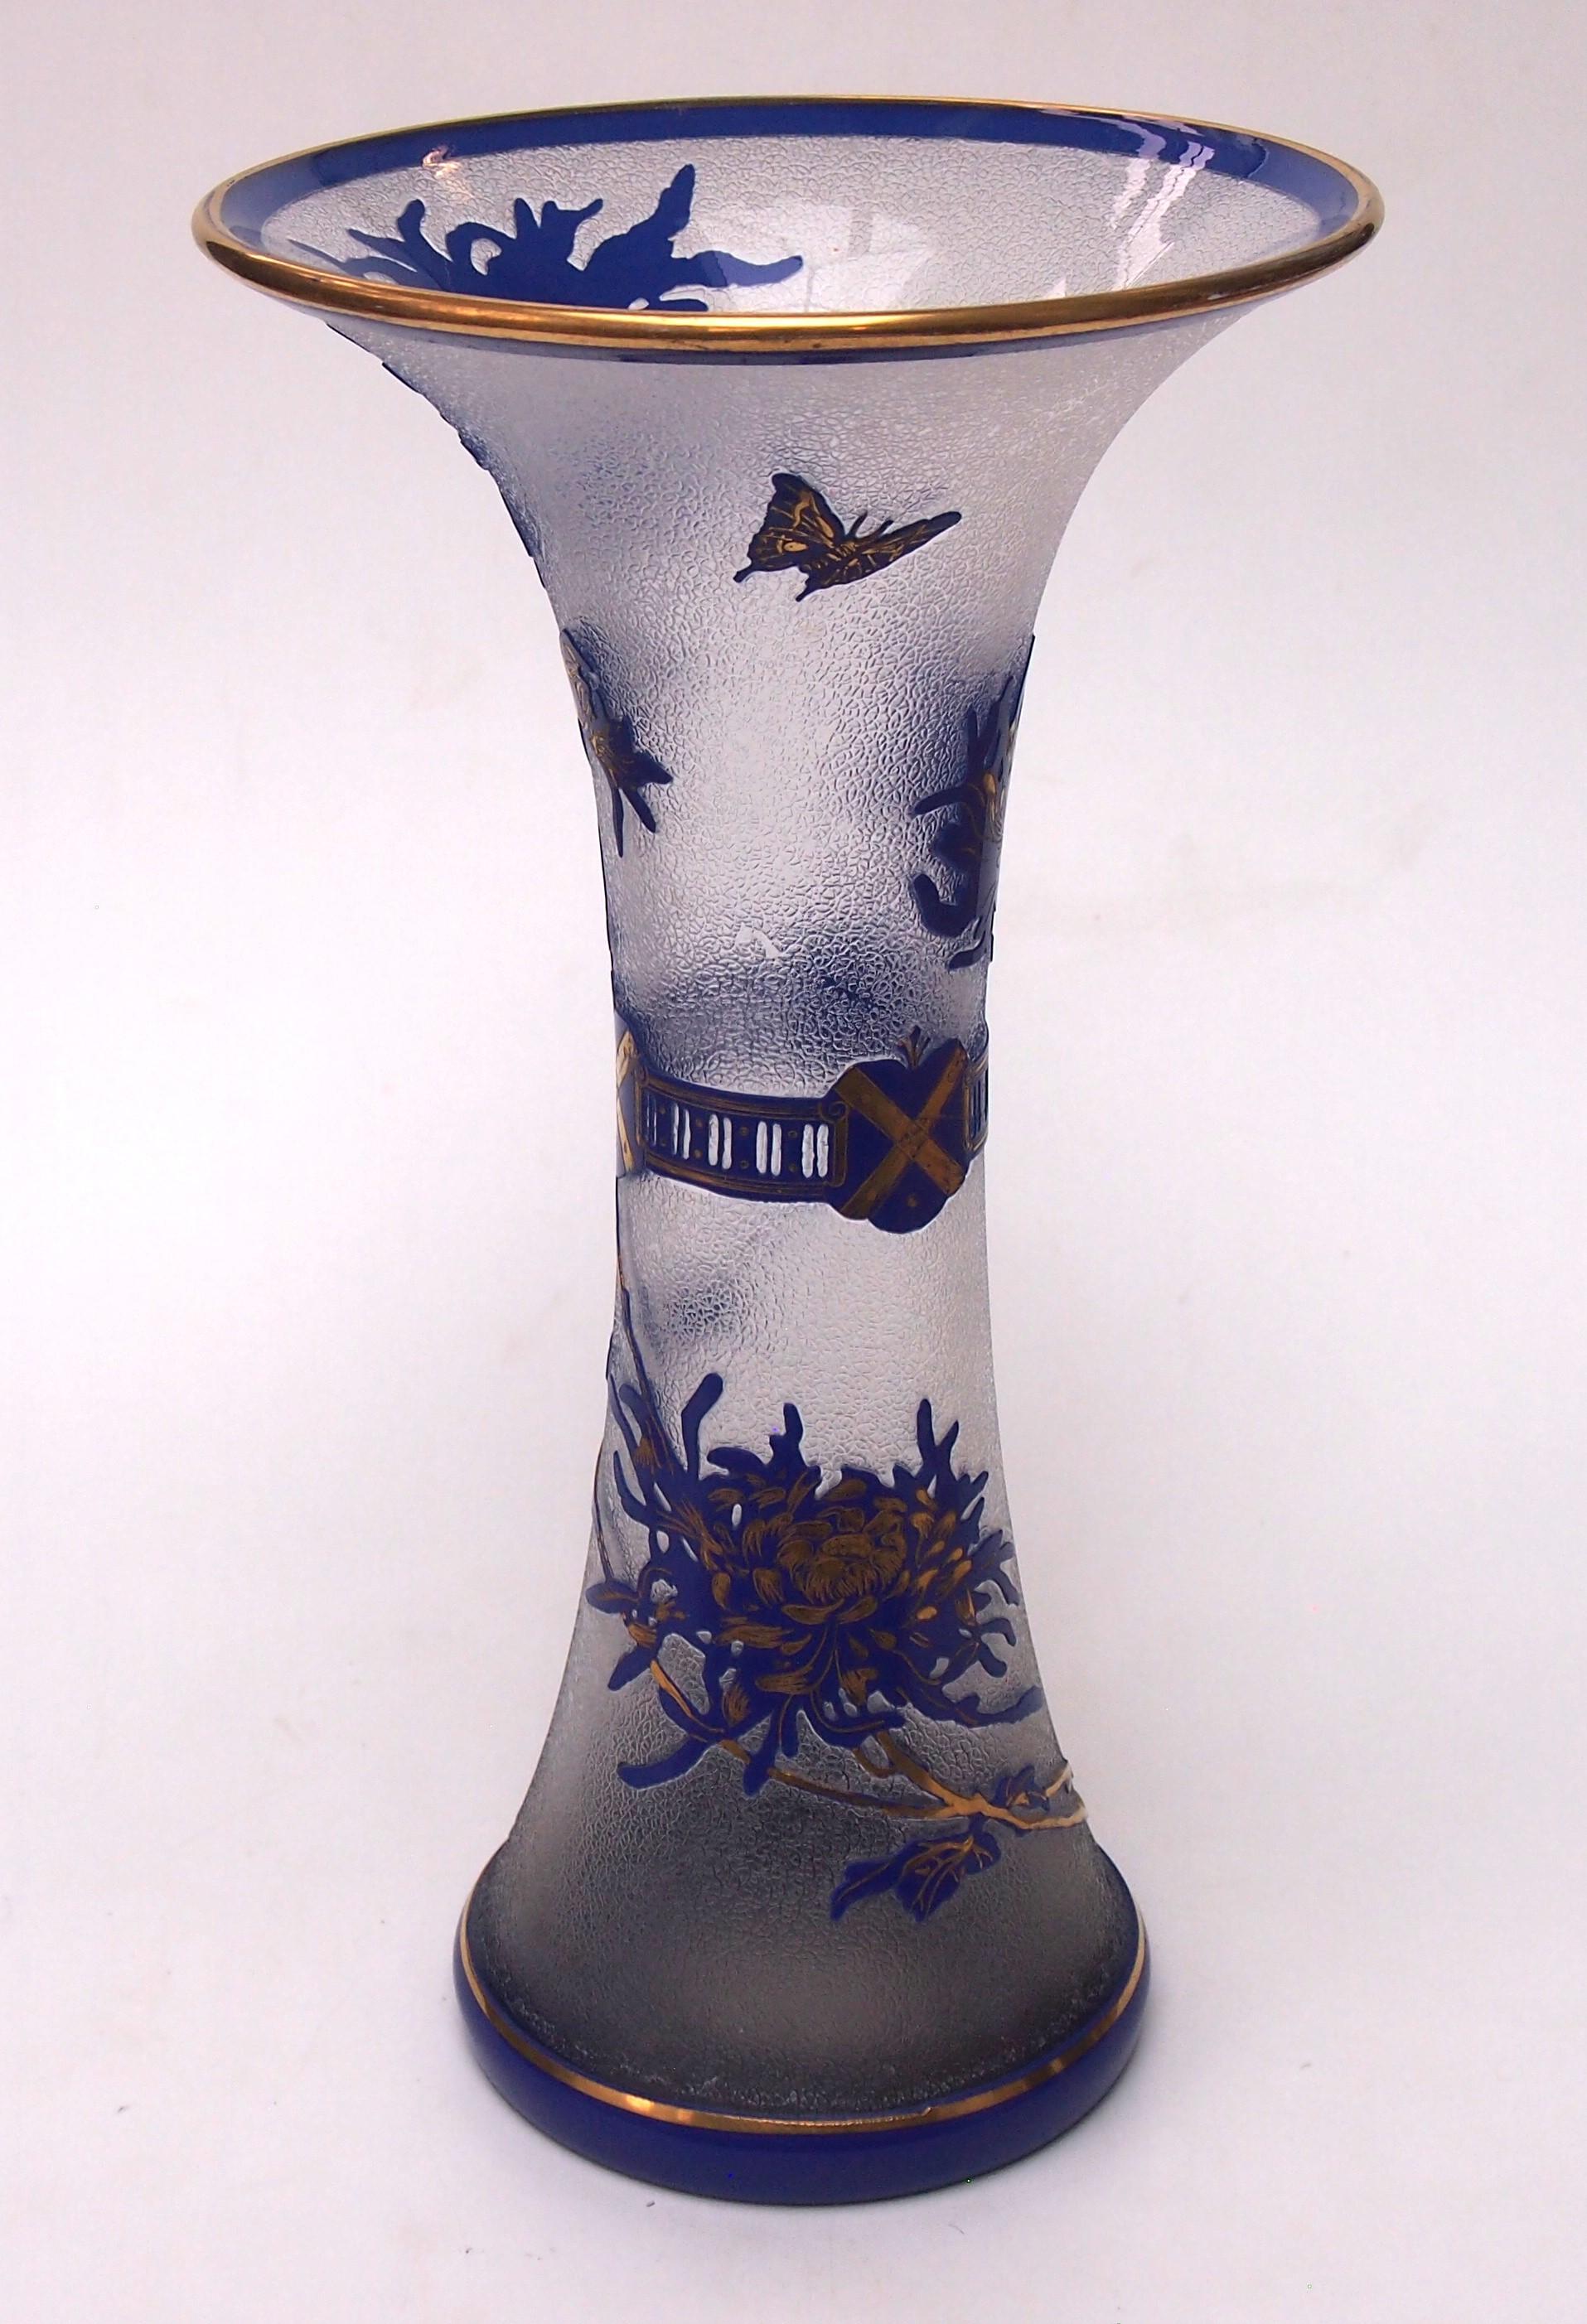 A stunning large waisted crystal early cameo vase by the Saint Louis Crystal works of France, made in vibrant dark blue cut to clear -with a frosted look background, The image depicts a mixture of heraldic images (around the centre) and a botanical